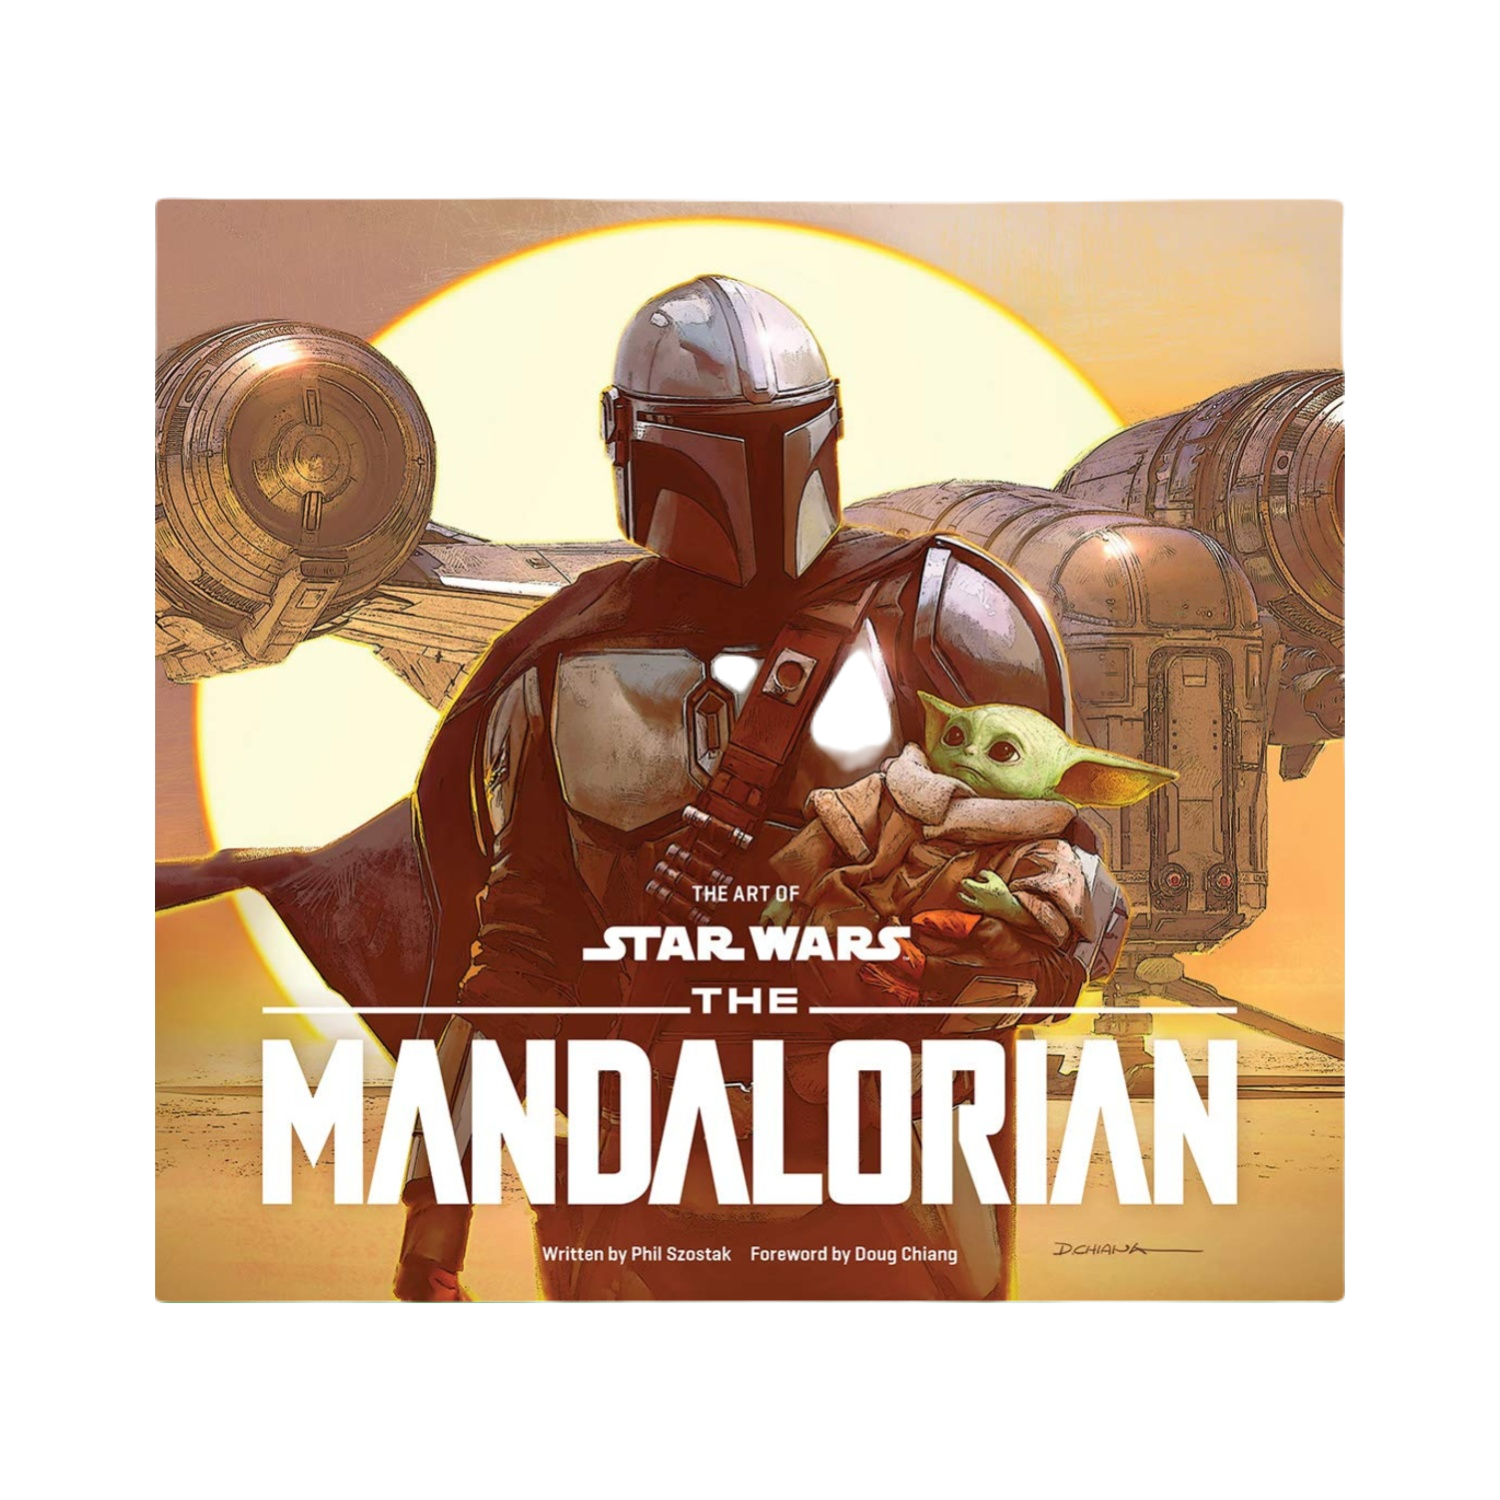 The Art of Star Wars: The Mandalorian by Phil Szostak (2020)